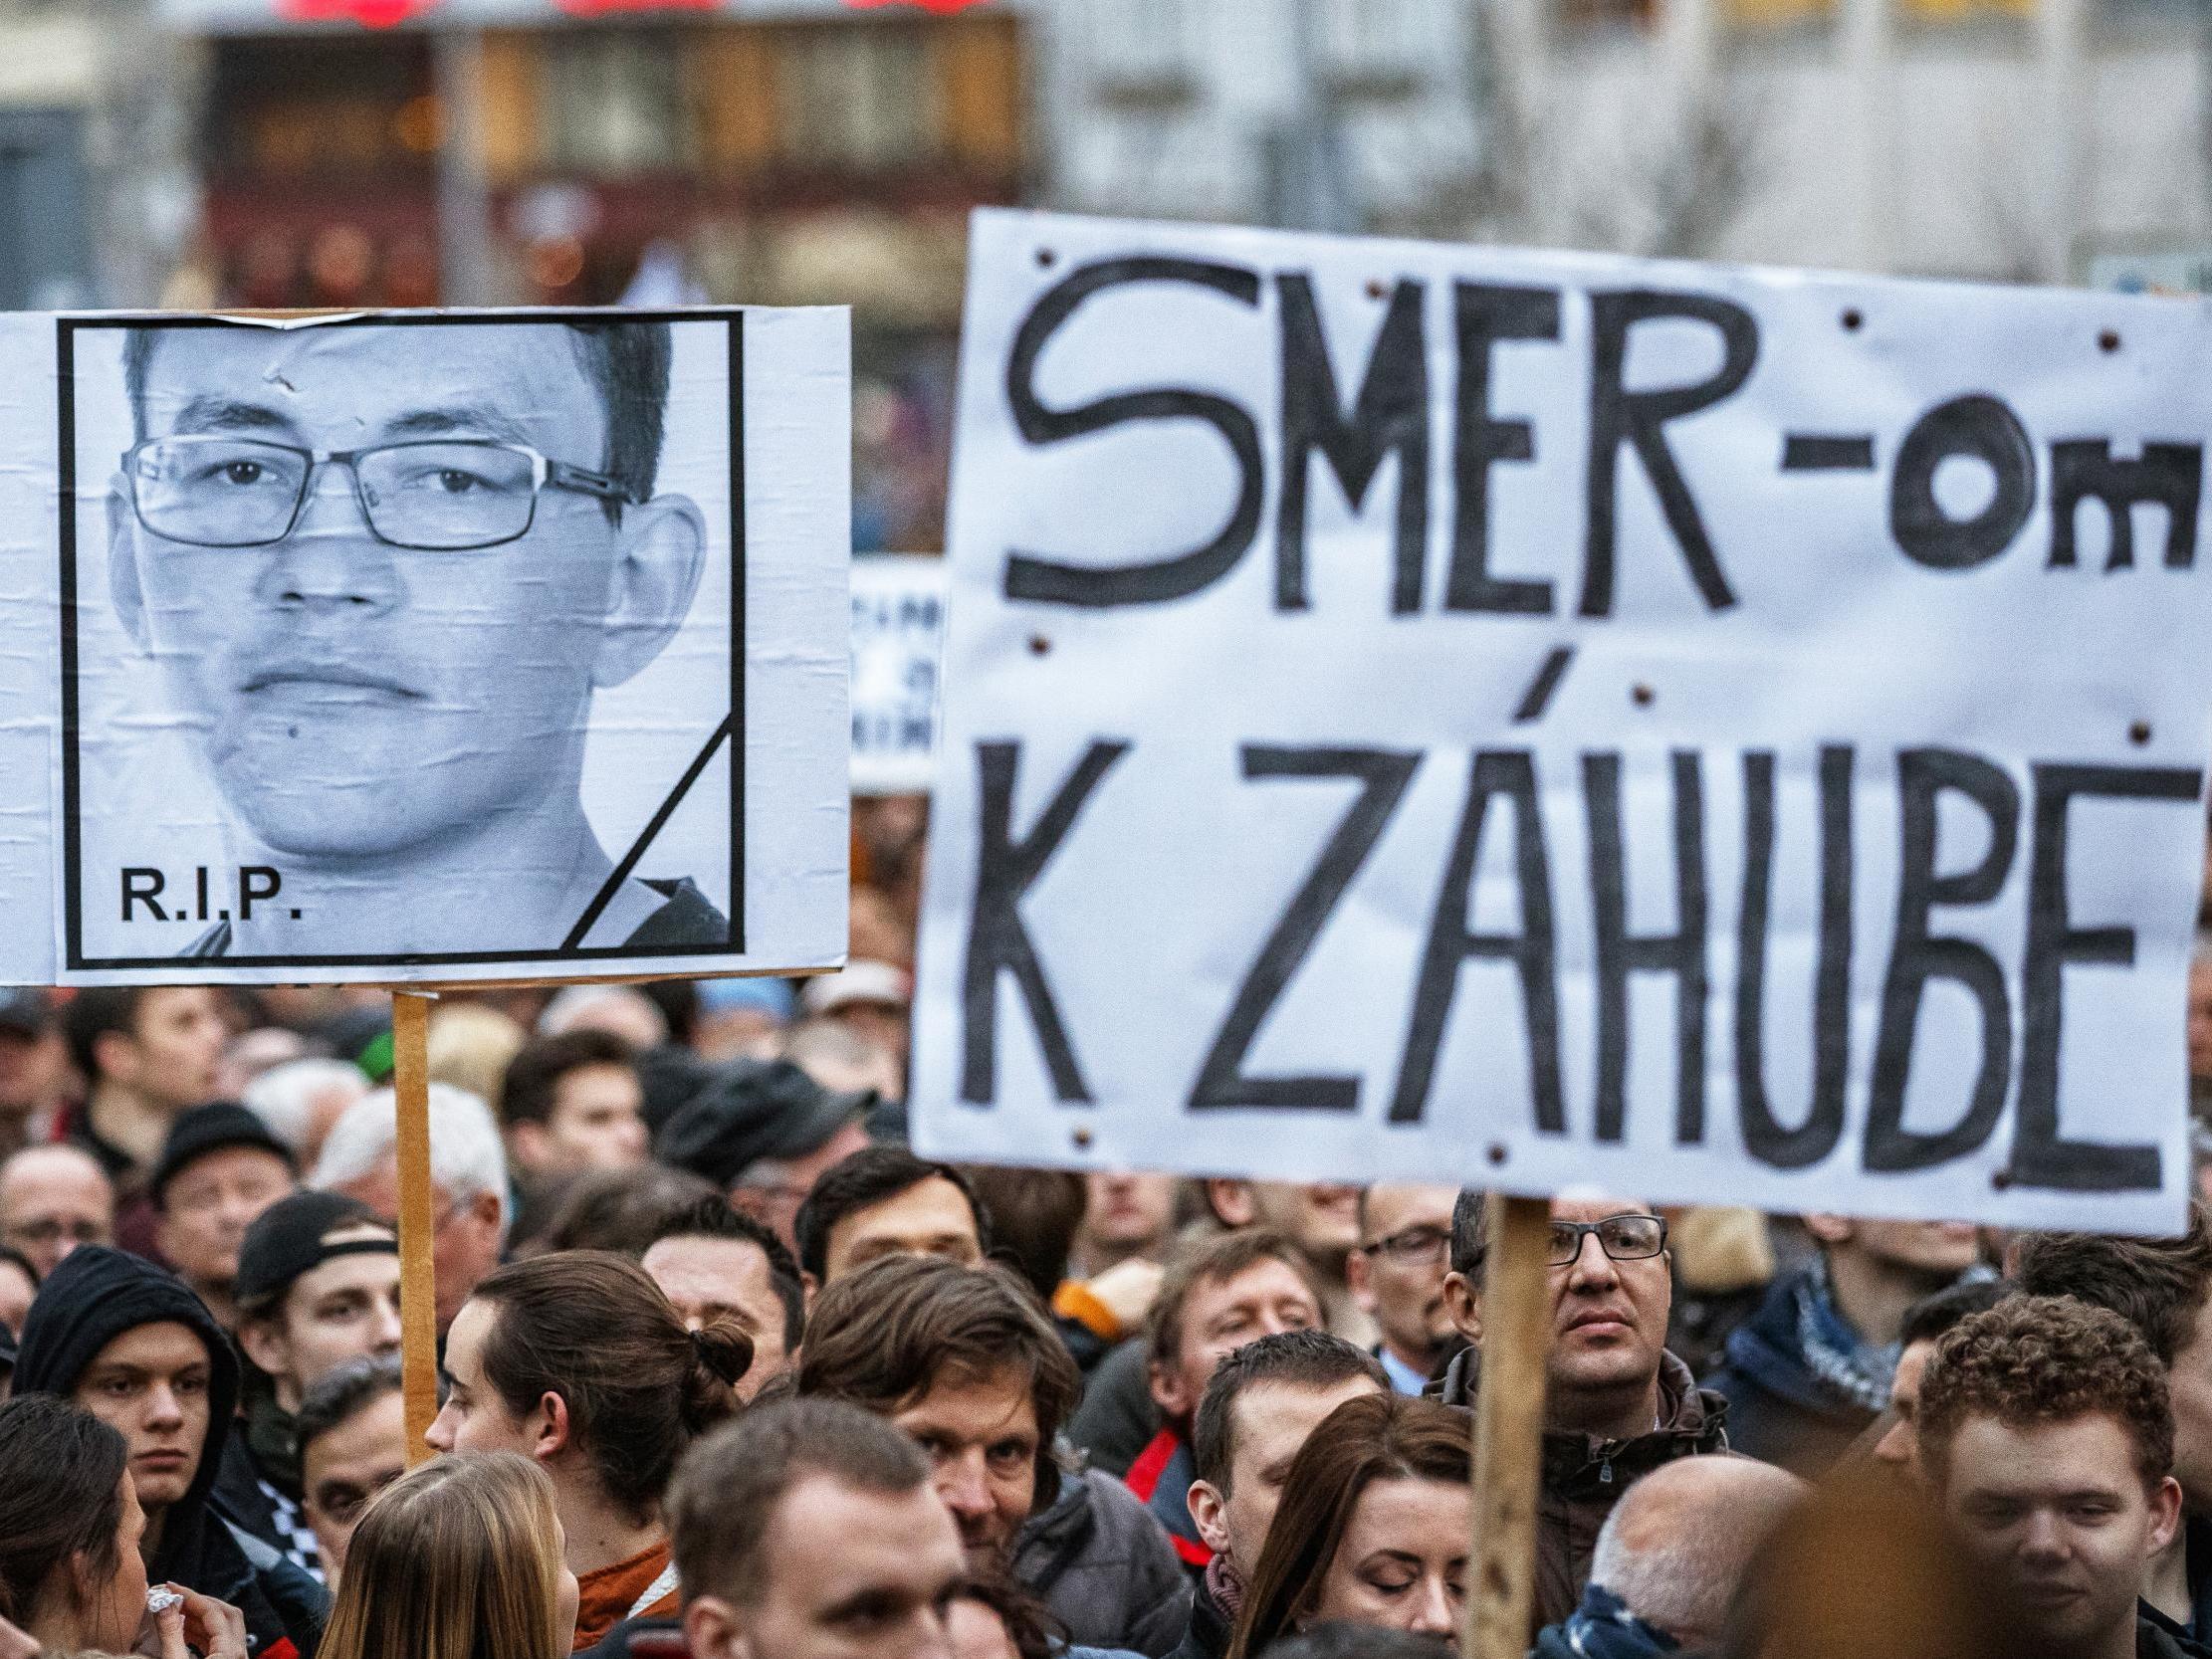 The death of Jan Kuciak and his fiancée Martina Kusnirova sparked huge protests in Slovakia